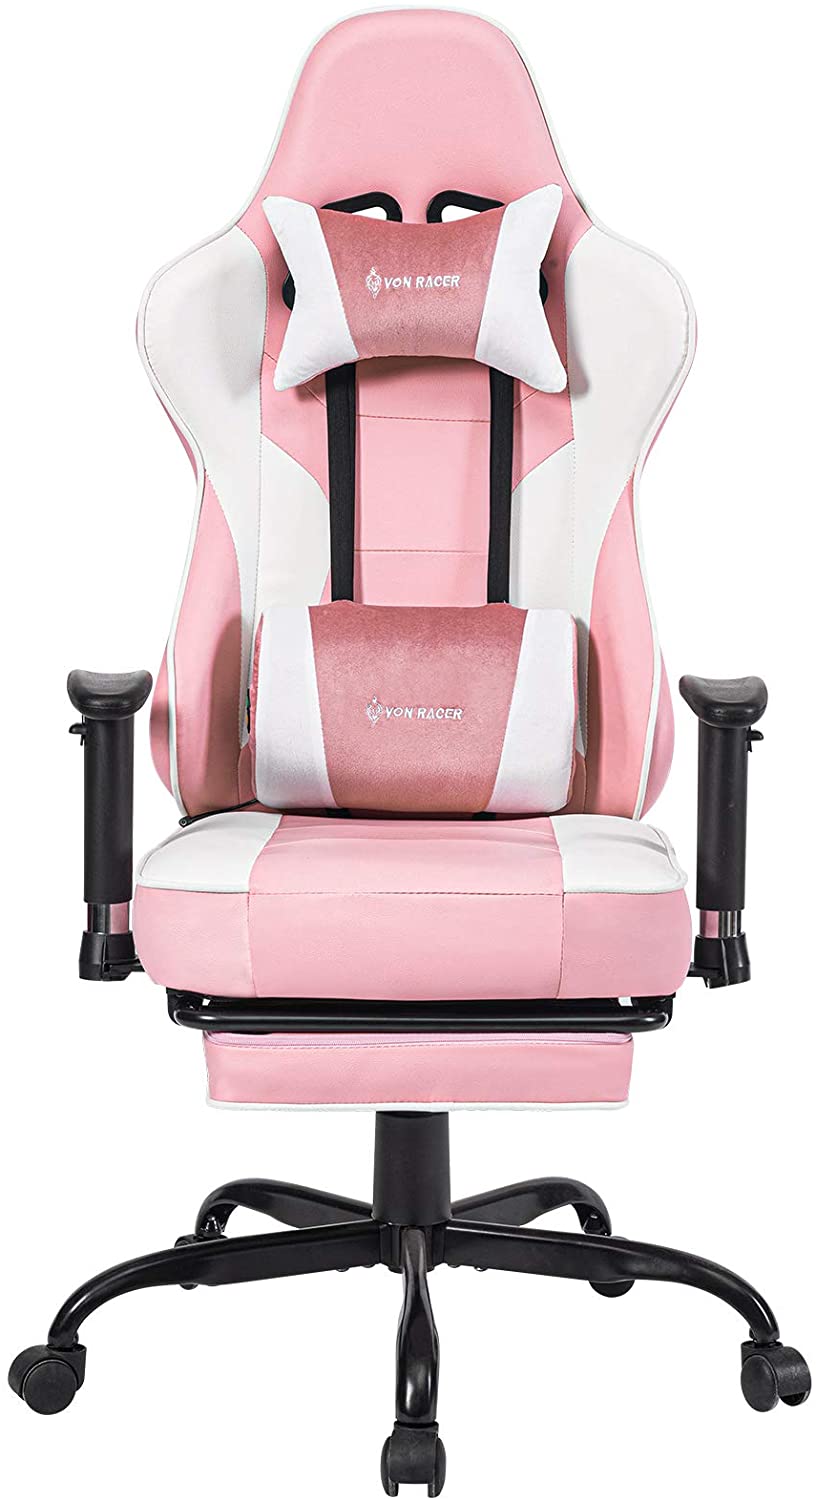 7 Best Pink Gaming Chair Models [2021 Edition] - The Gamer Collective